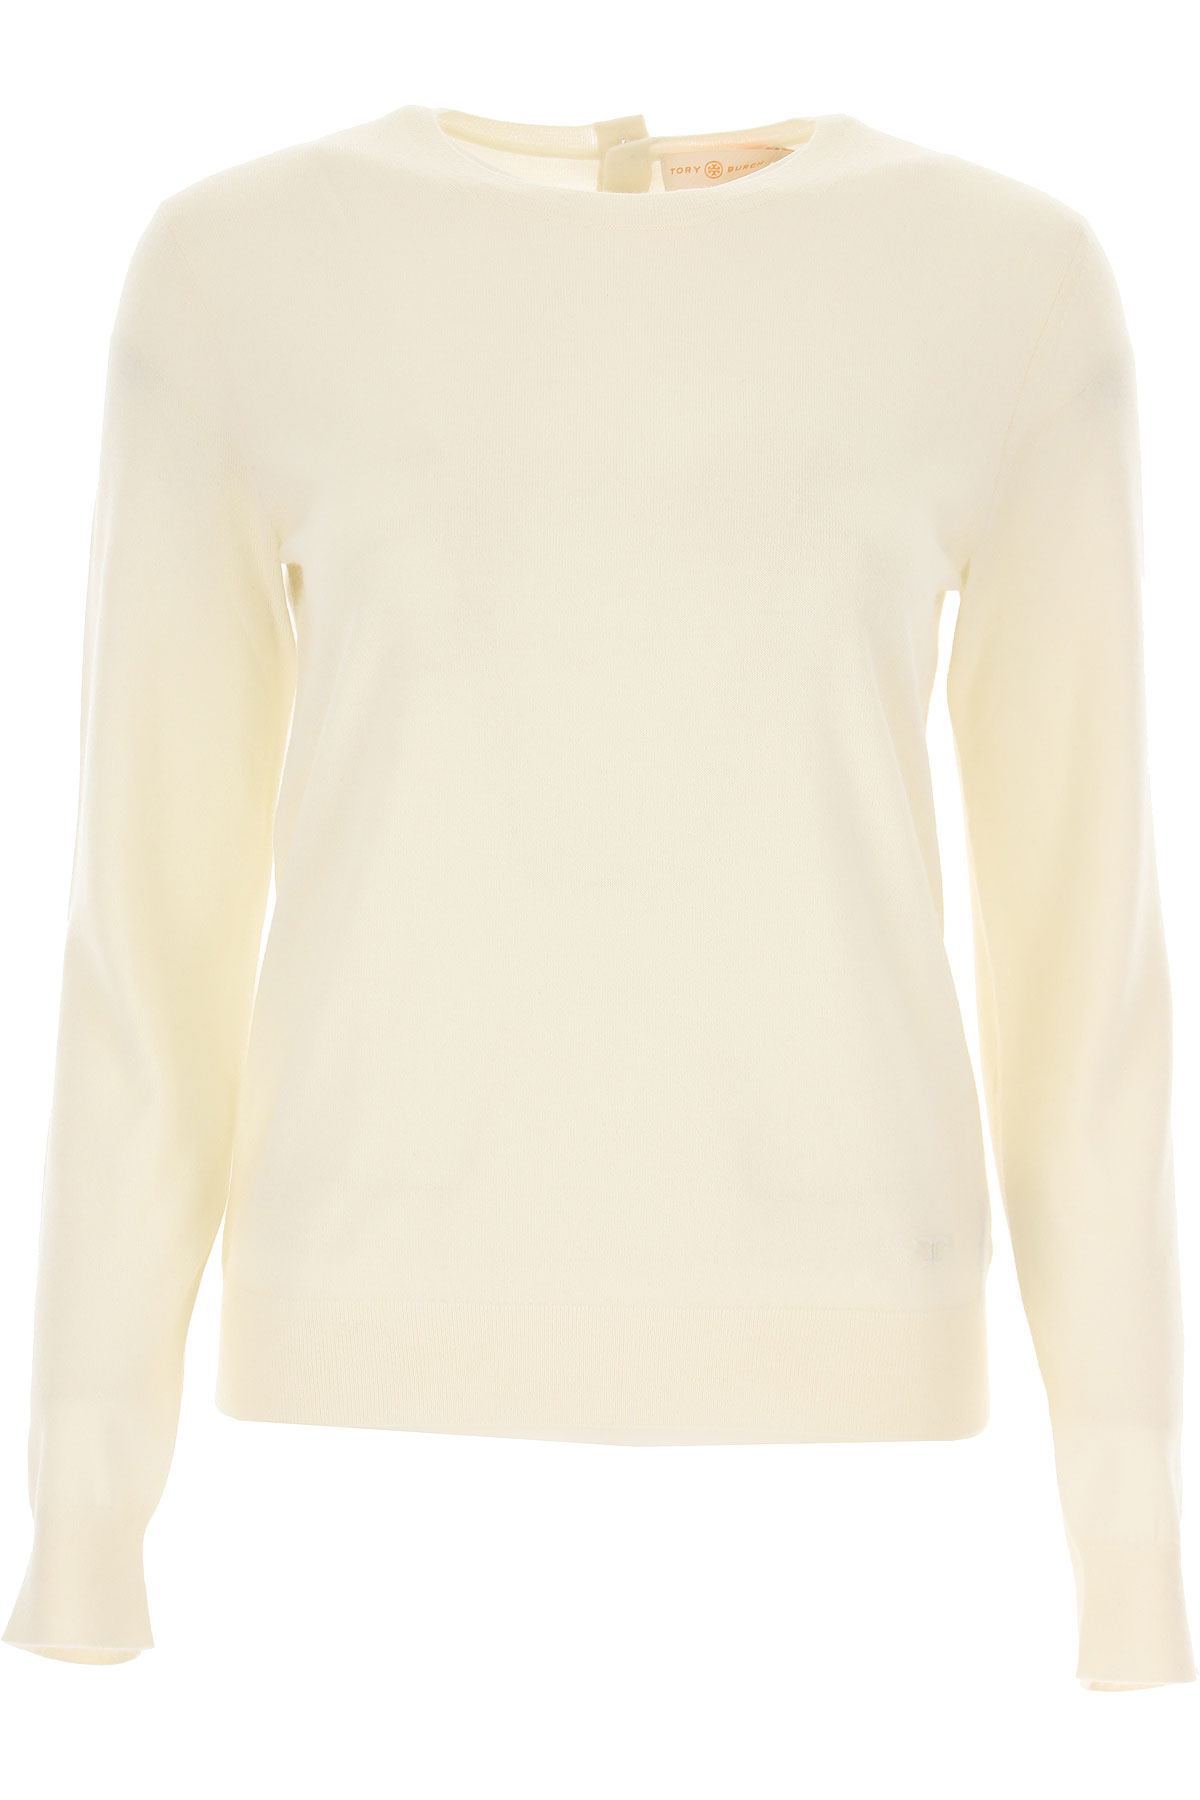 Tory BurchTory Burch Sweater for Women Jumper On Sale, New Ivory ...